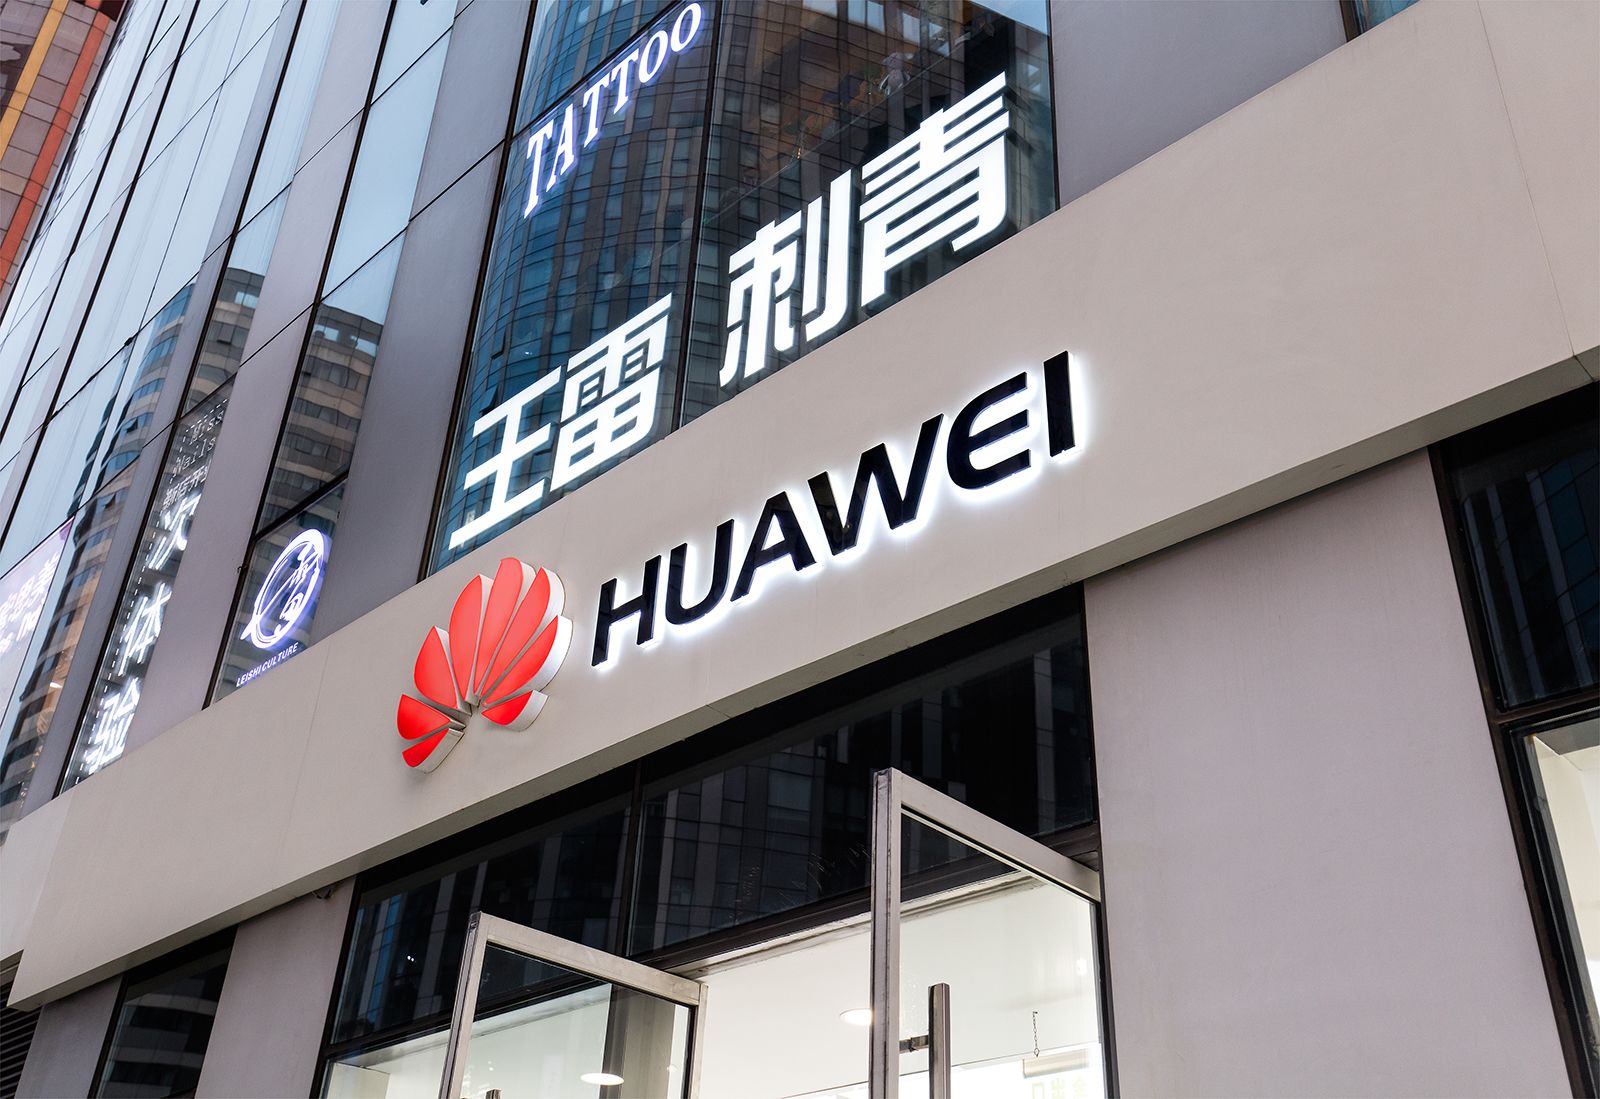 Did Huawei already develop its own 5G chip to get around US sanctions? -  The Verge